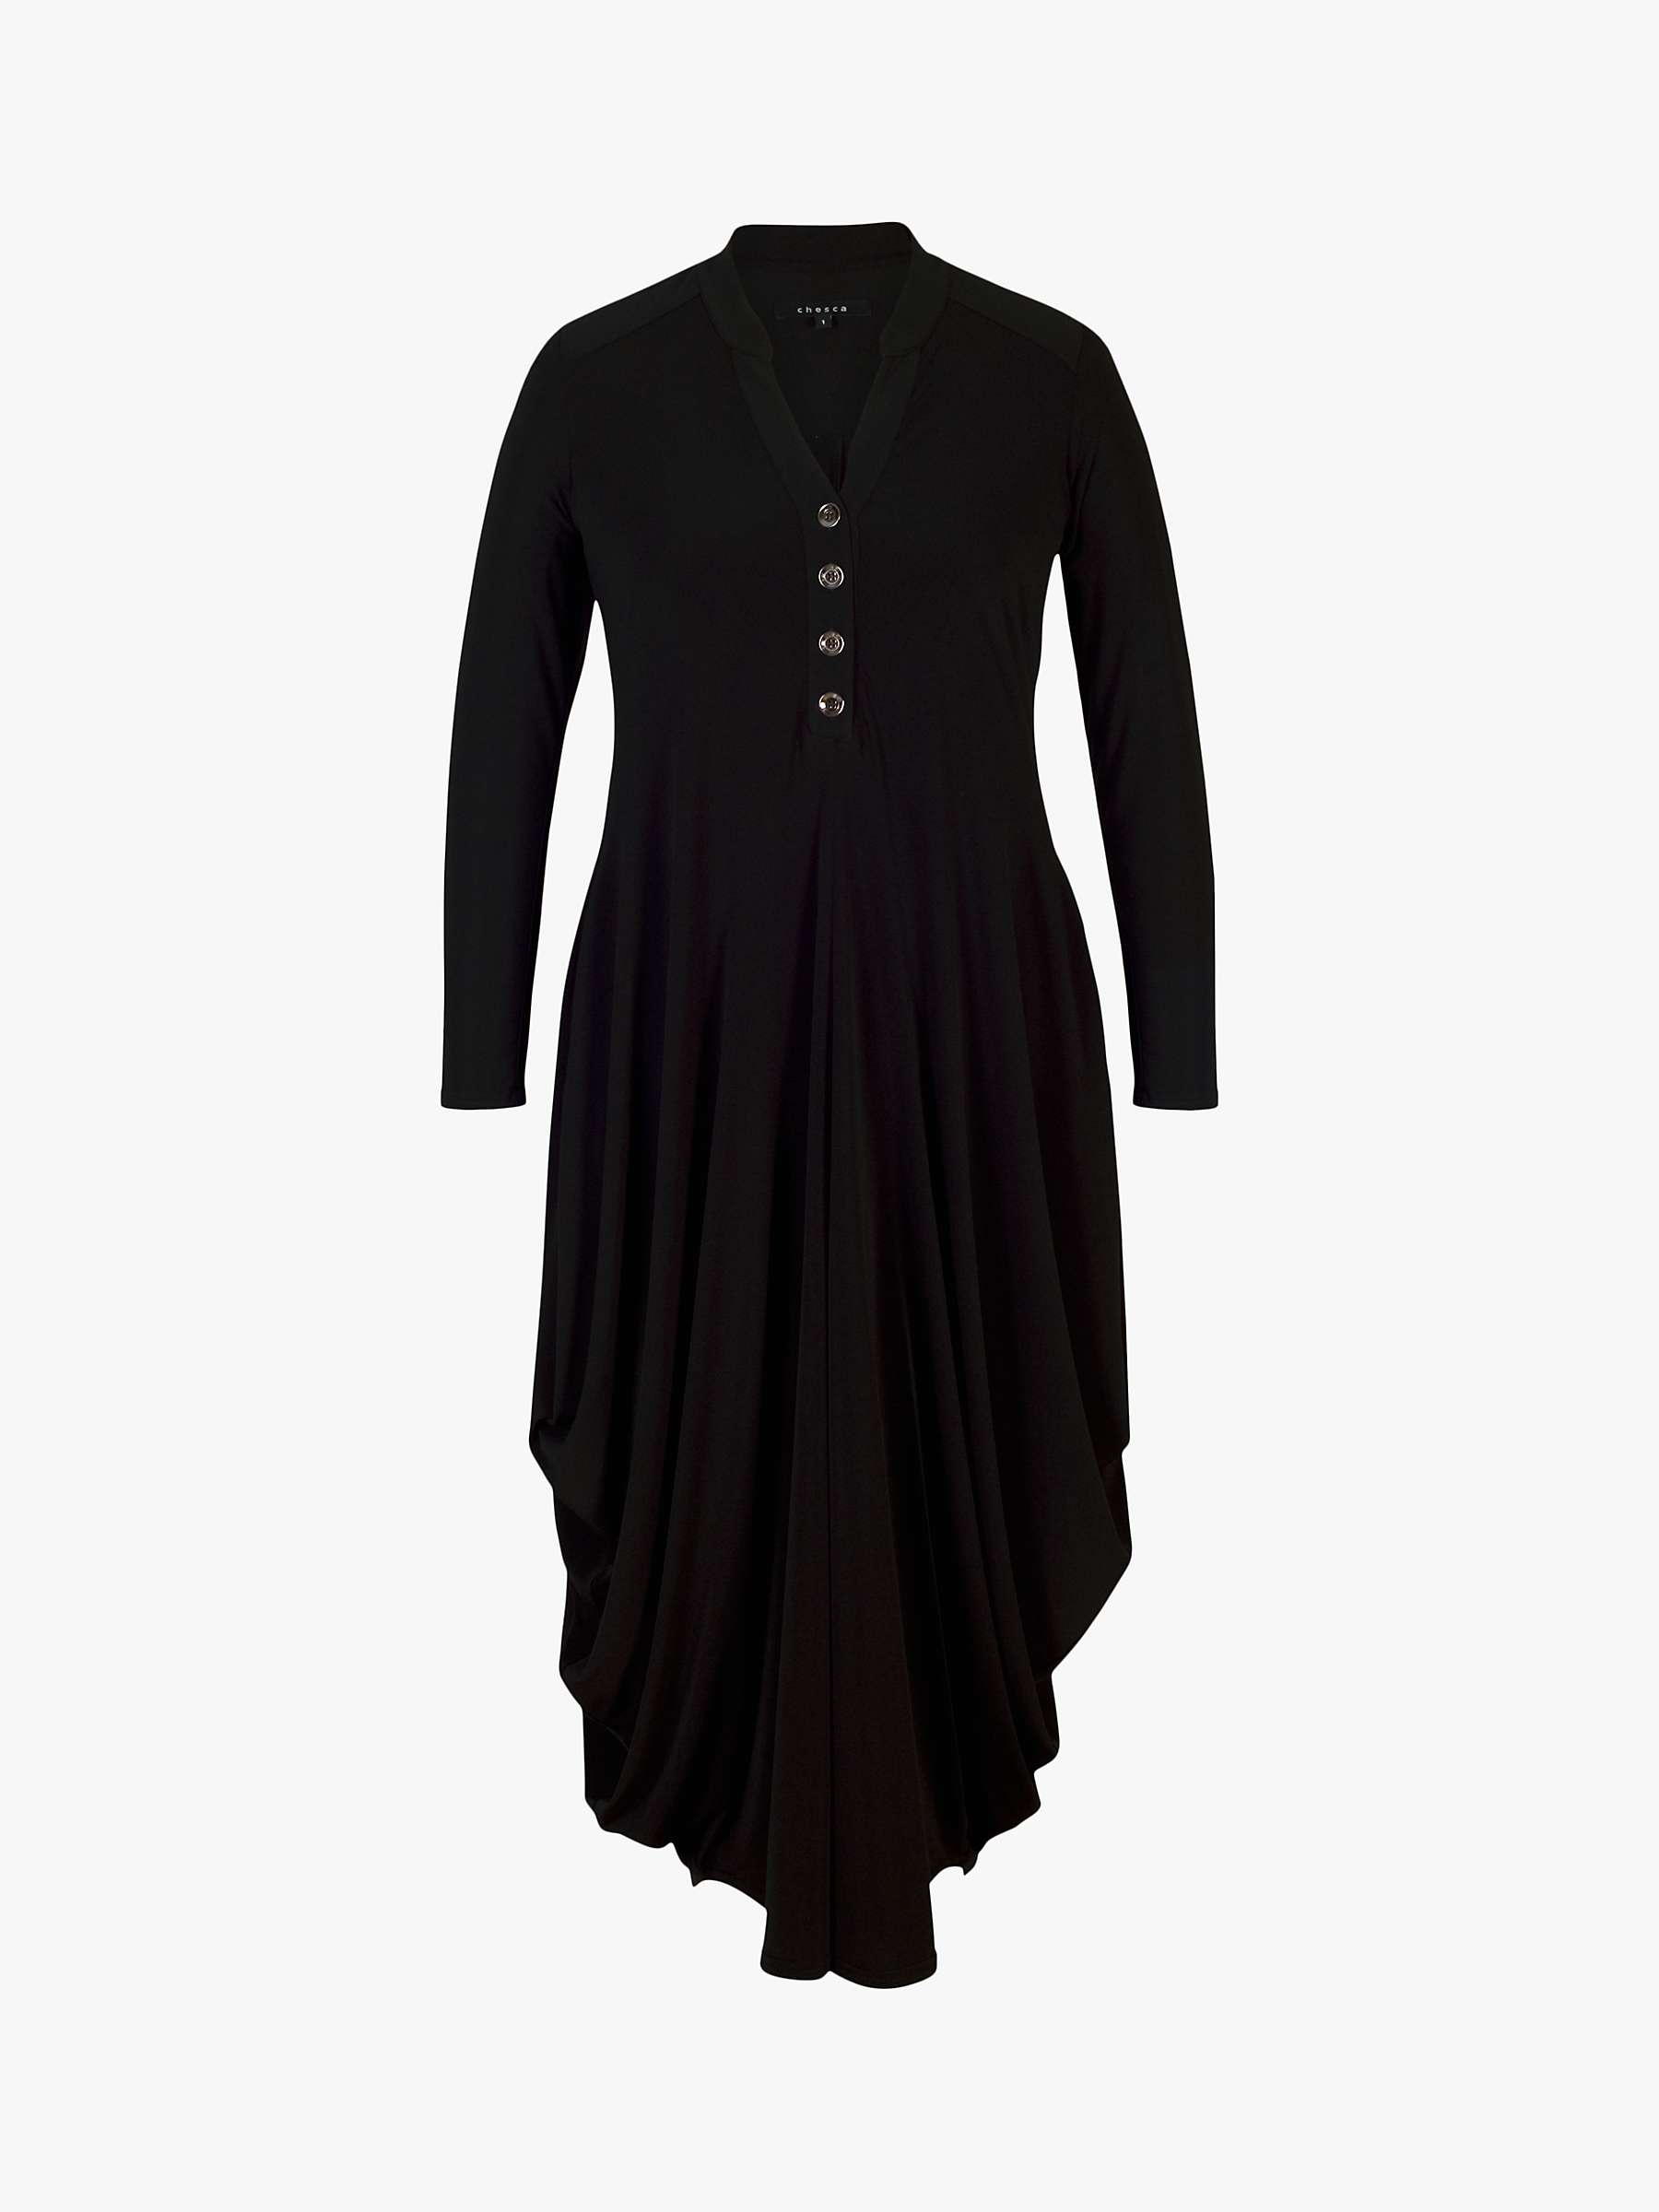 Buy chesca Placket Midi Jersey Dress Online at johnlewis.com